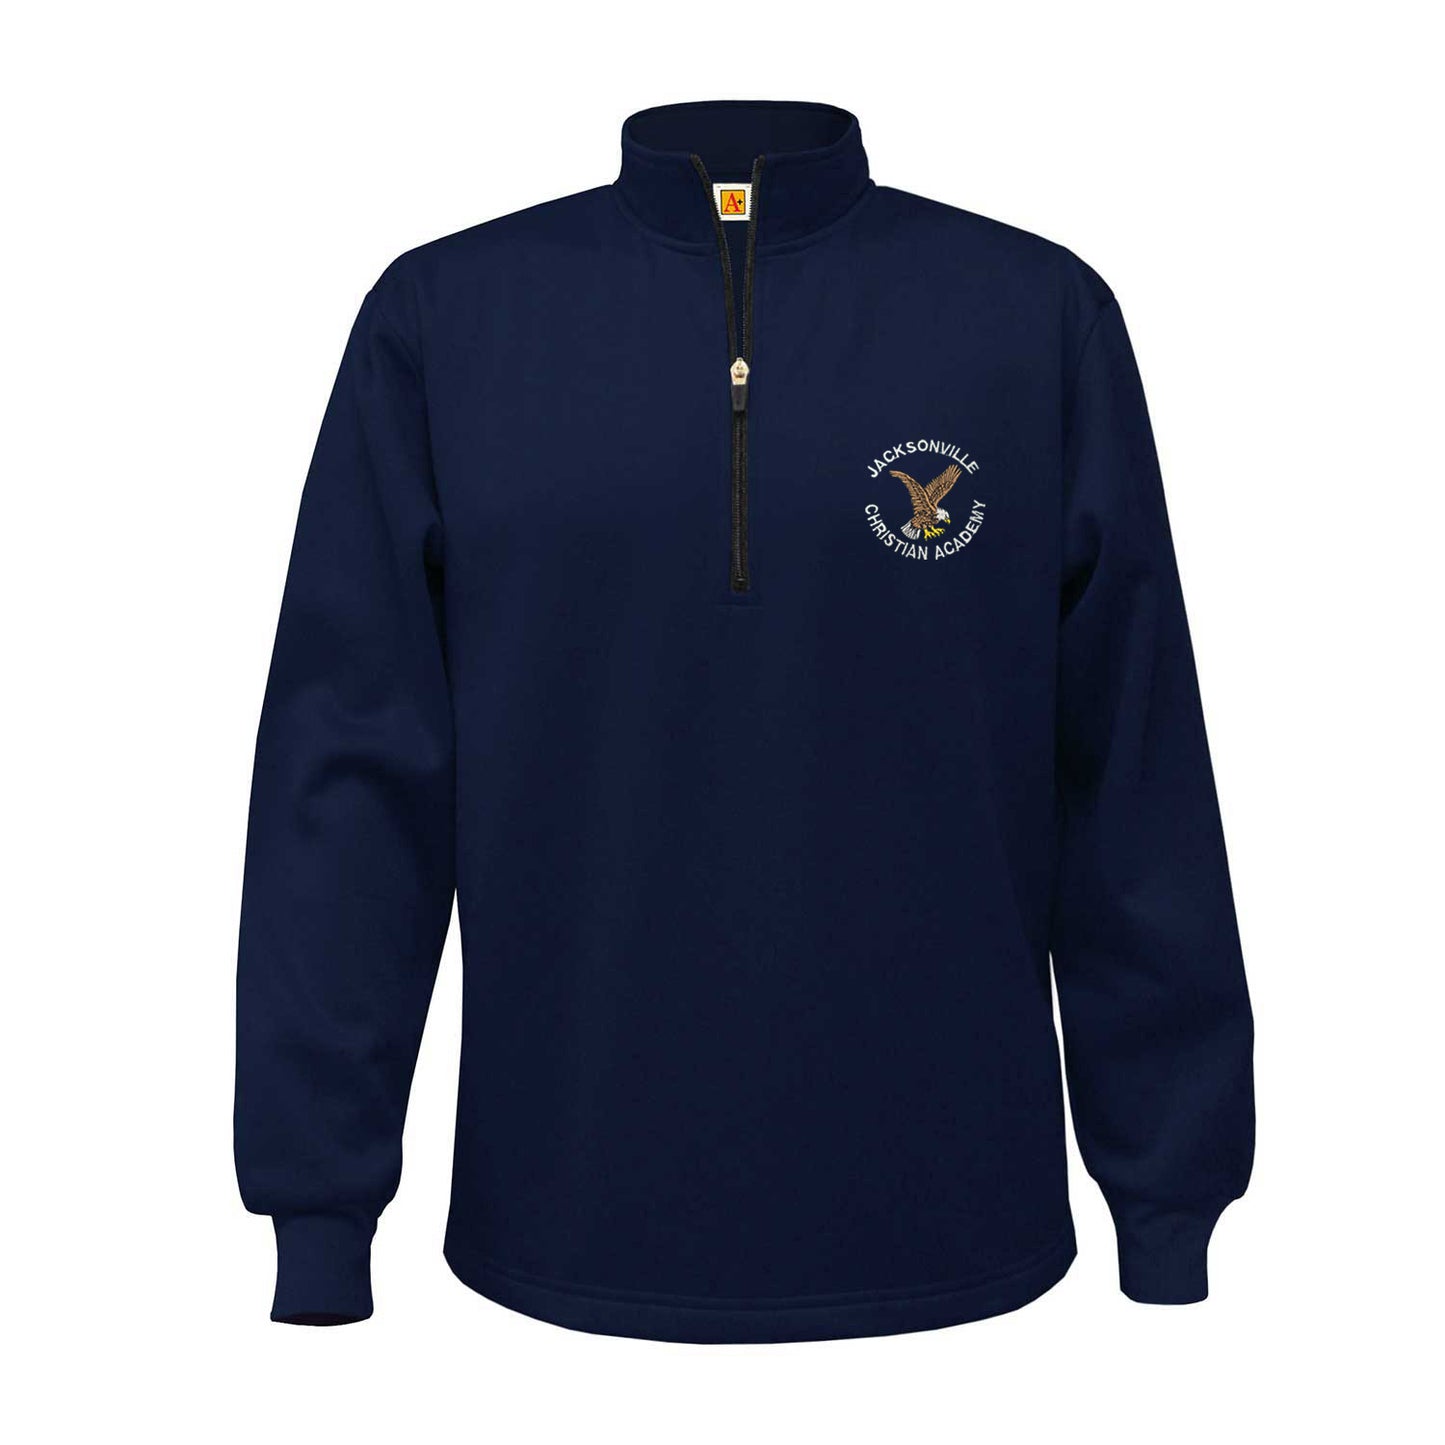 Adult Performance Pullover with Jacksonville Christian Academy Logo